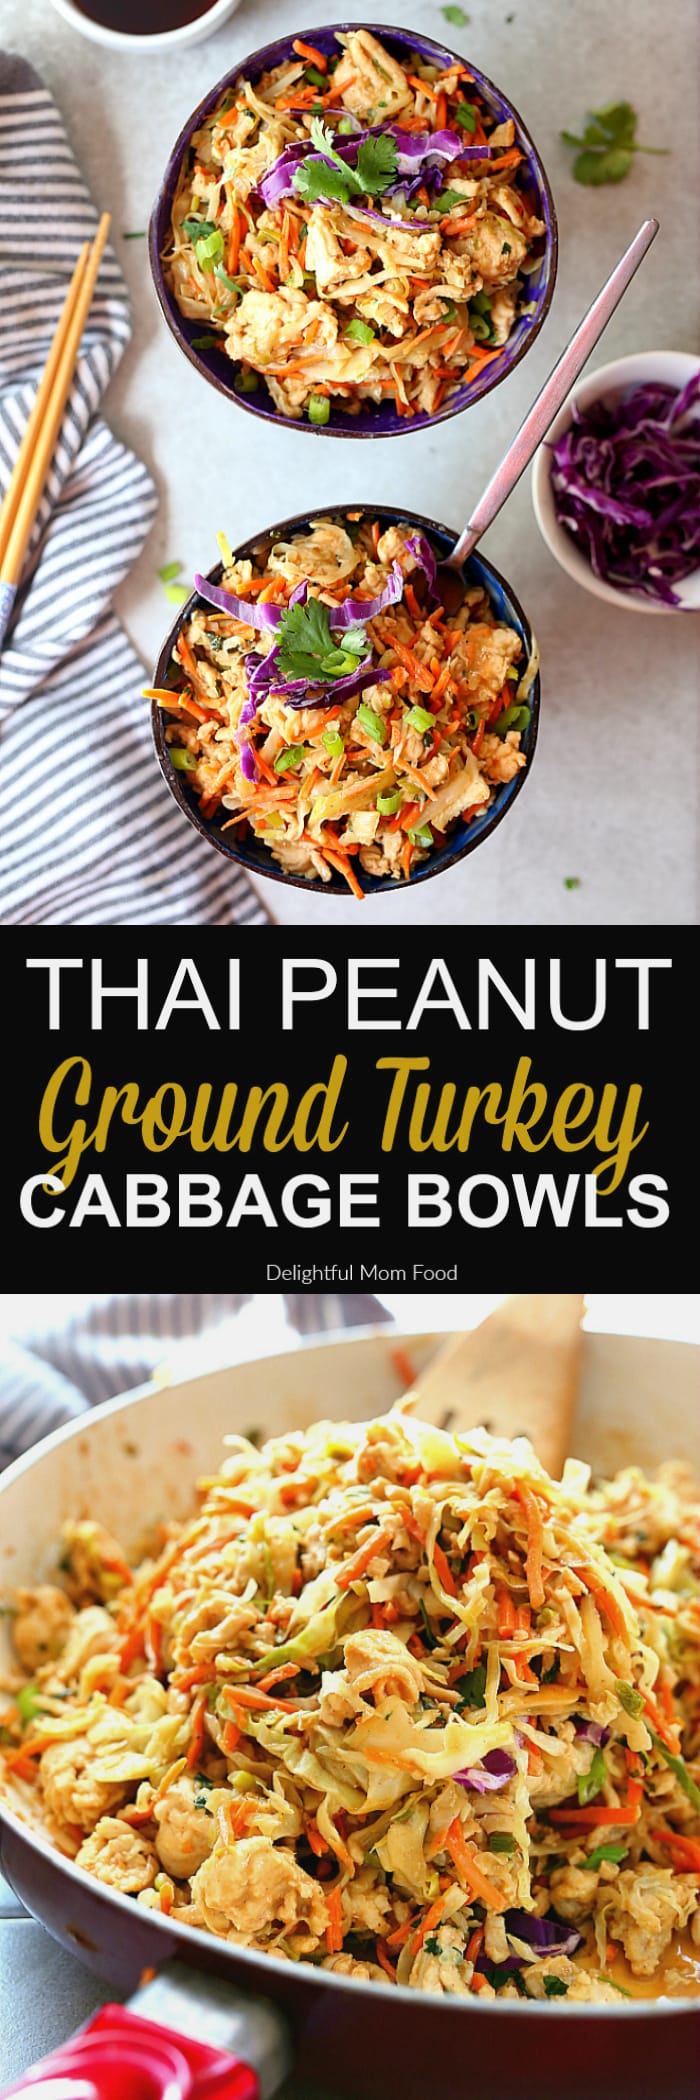 Thai peanut sauce tossed with ground turkey and cabbage makes this meal low carb and deliciously flavorful! Ready in 20 minutes!  #thai #peanut #sauce #groundturkey #cabbage #bowls #lowcarb #healthy #glutenfree #recipe #onepan #easy #quick | Recipe at delightfulmomfood.com